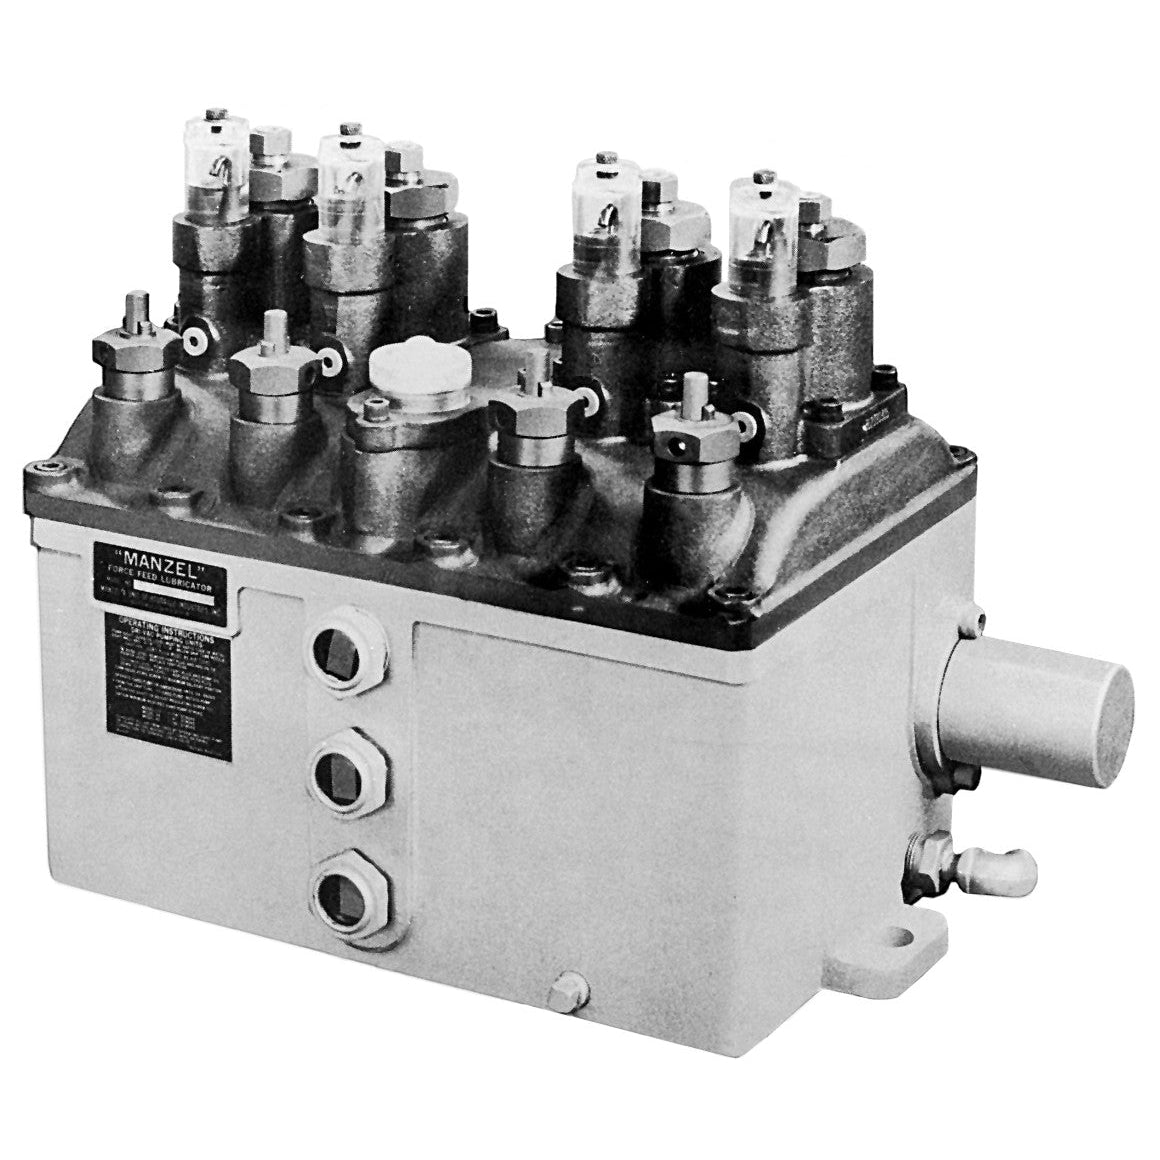 HP-50 Lubricator with 4 Pumps, Provisions for Flange Mounted Auto Fill, Low Level in Fill Plate, rotation alarm